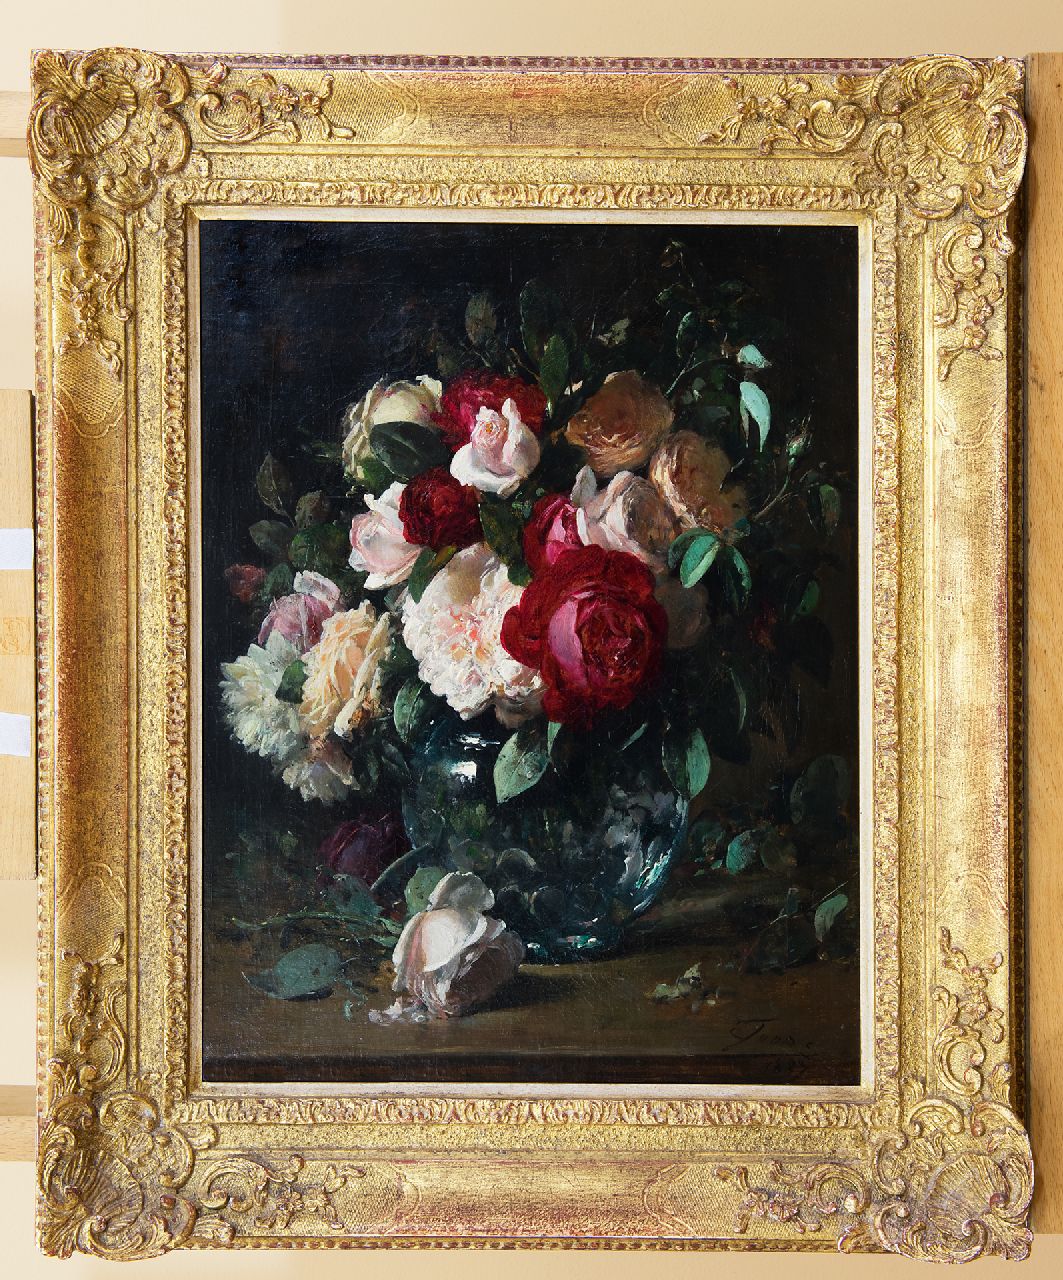 Joors E.  | Eugeen Joors | Paintings offered for sale | Roses in a glass vase, oil on canvas 45.5 x 35.6 cm, signed l.r. and dated 1887